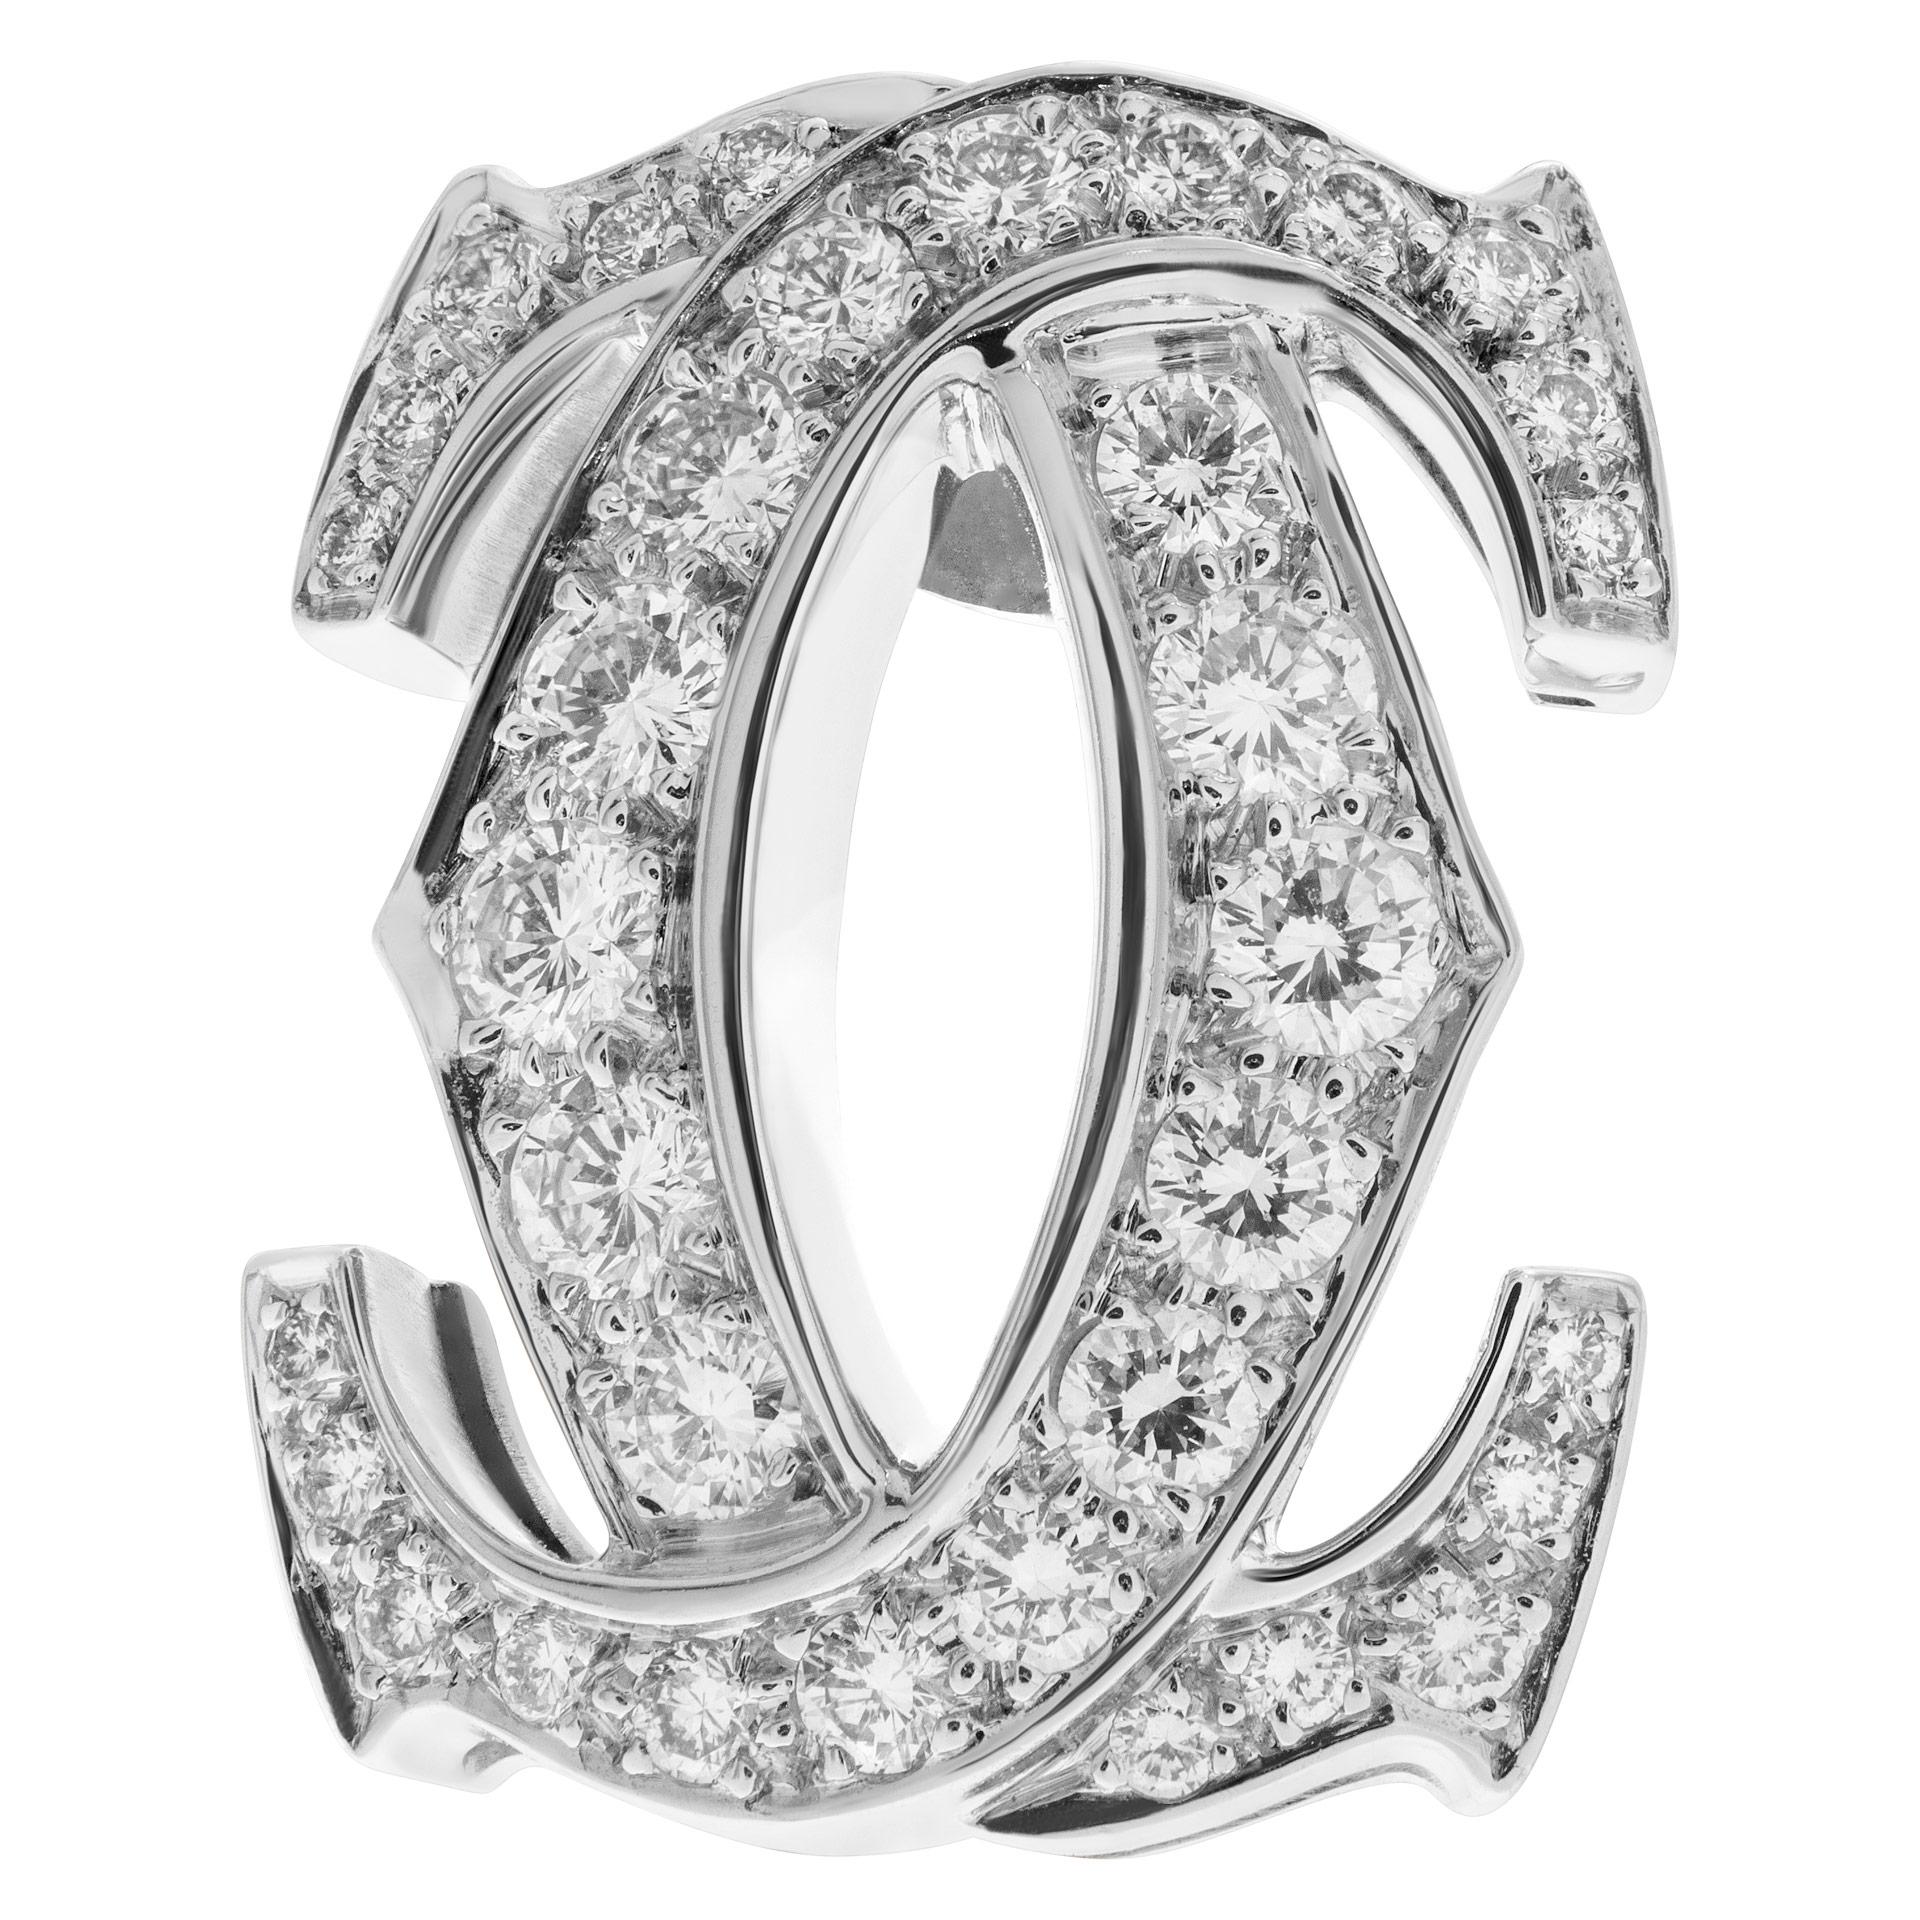 LOST YOUR CARTIER? Only one! Single Cartier Double C earring with 0.84 carats in diamond in 18k white gold. Width: 16mm. Ca also be made into a pendant to complete your existing Cartier set!